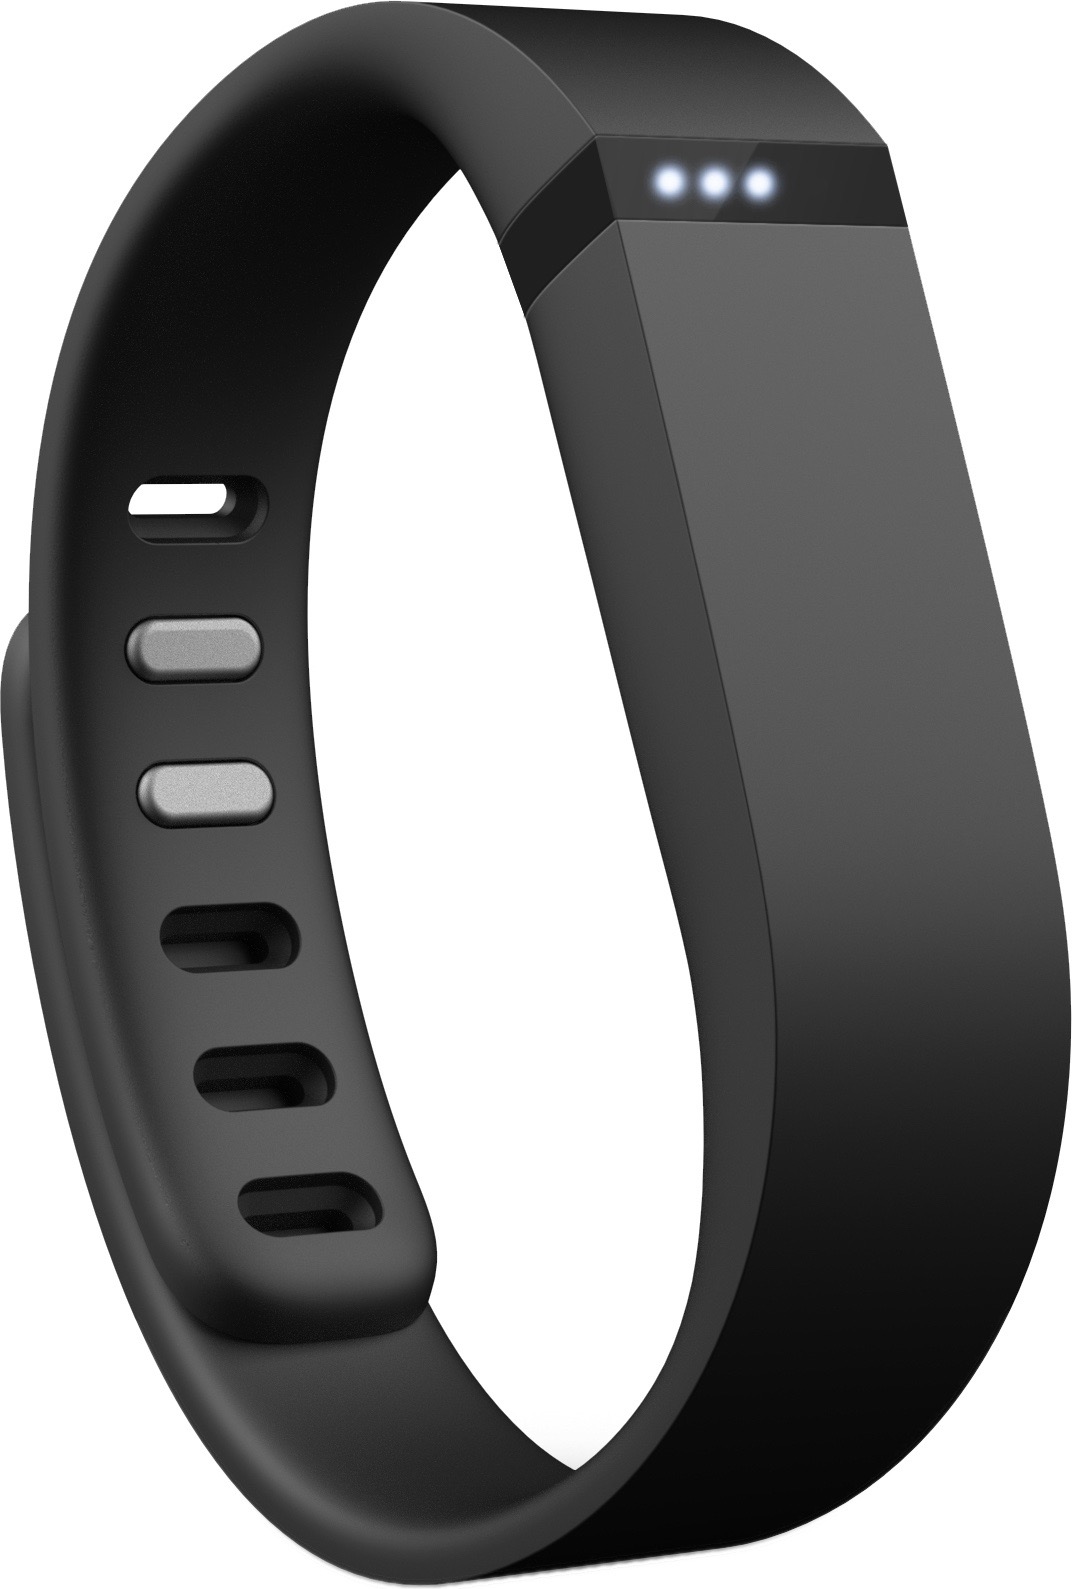 which is the cheapest fitbit